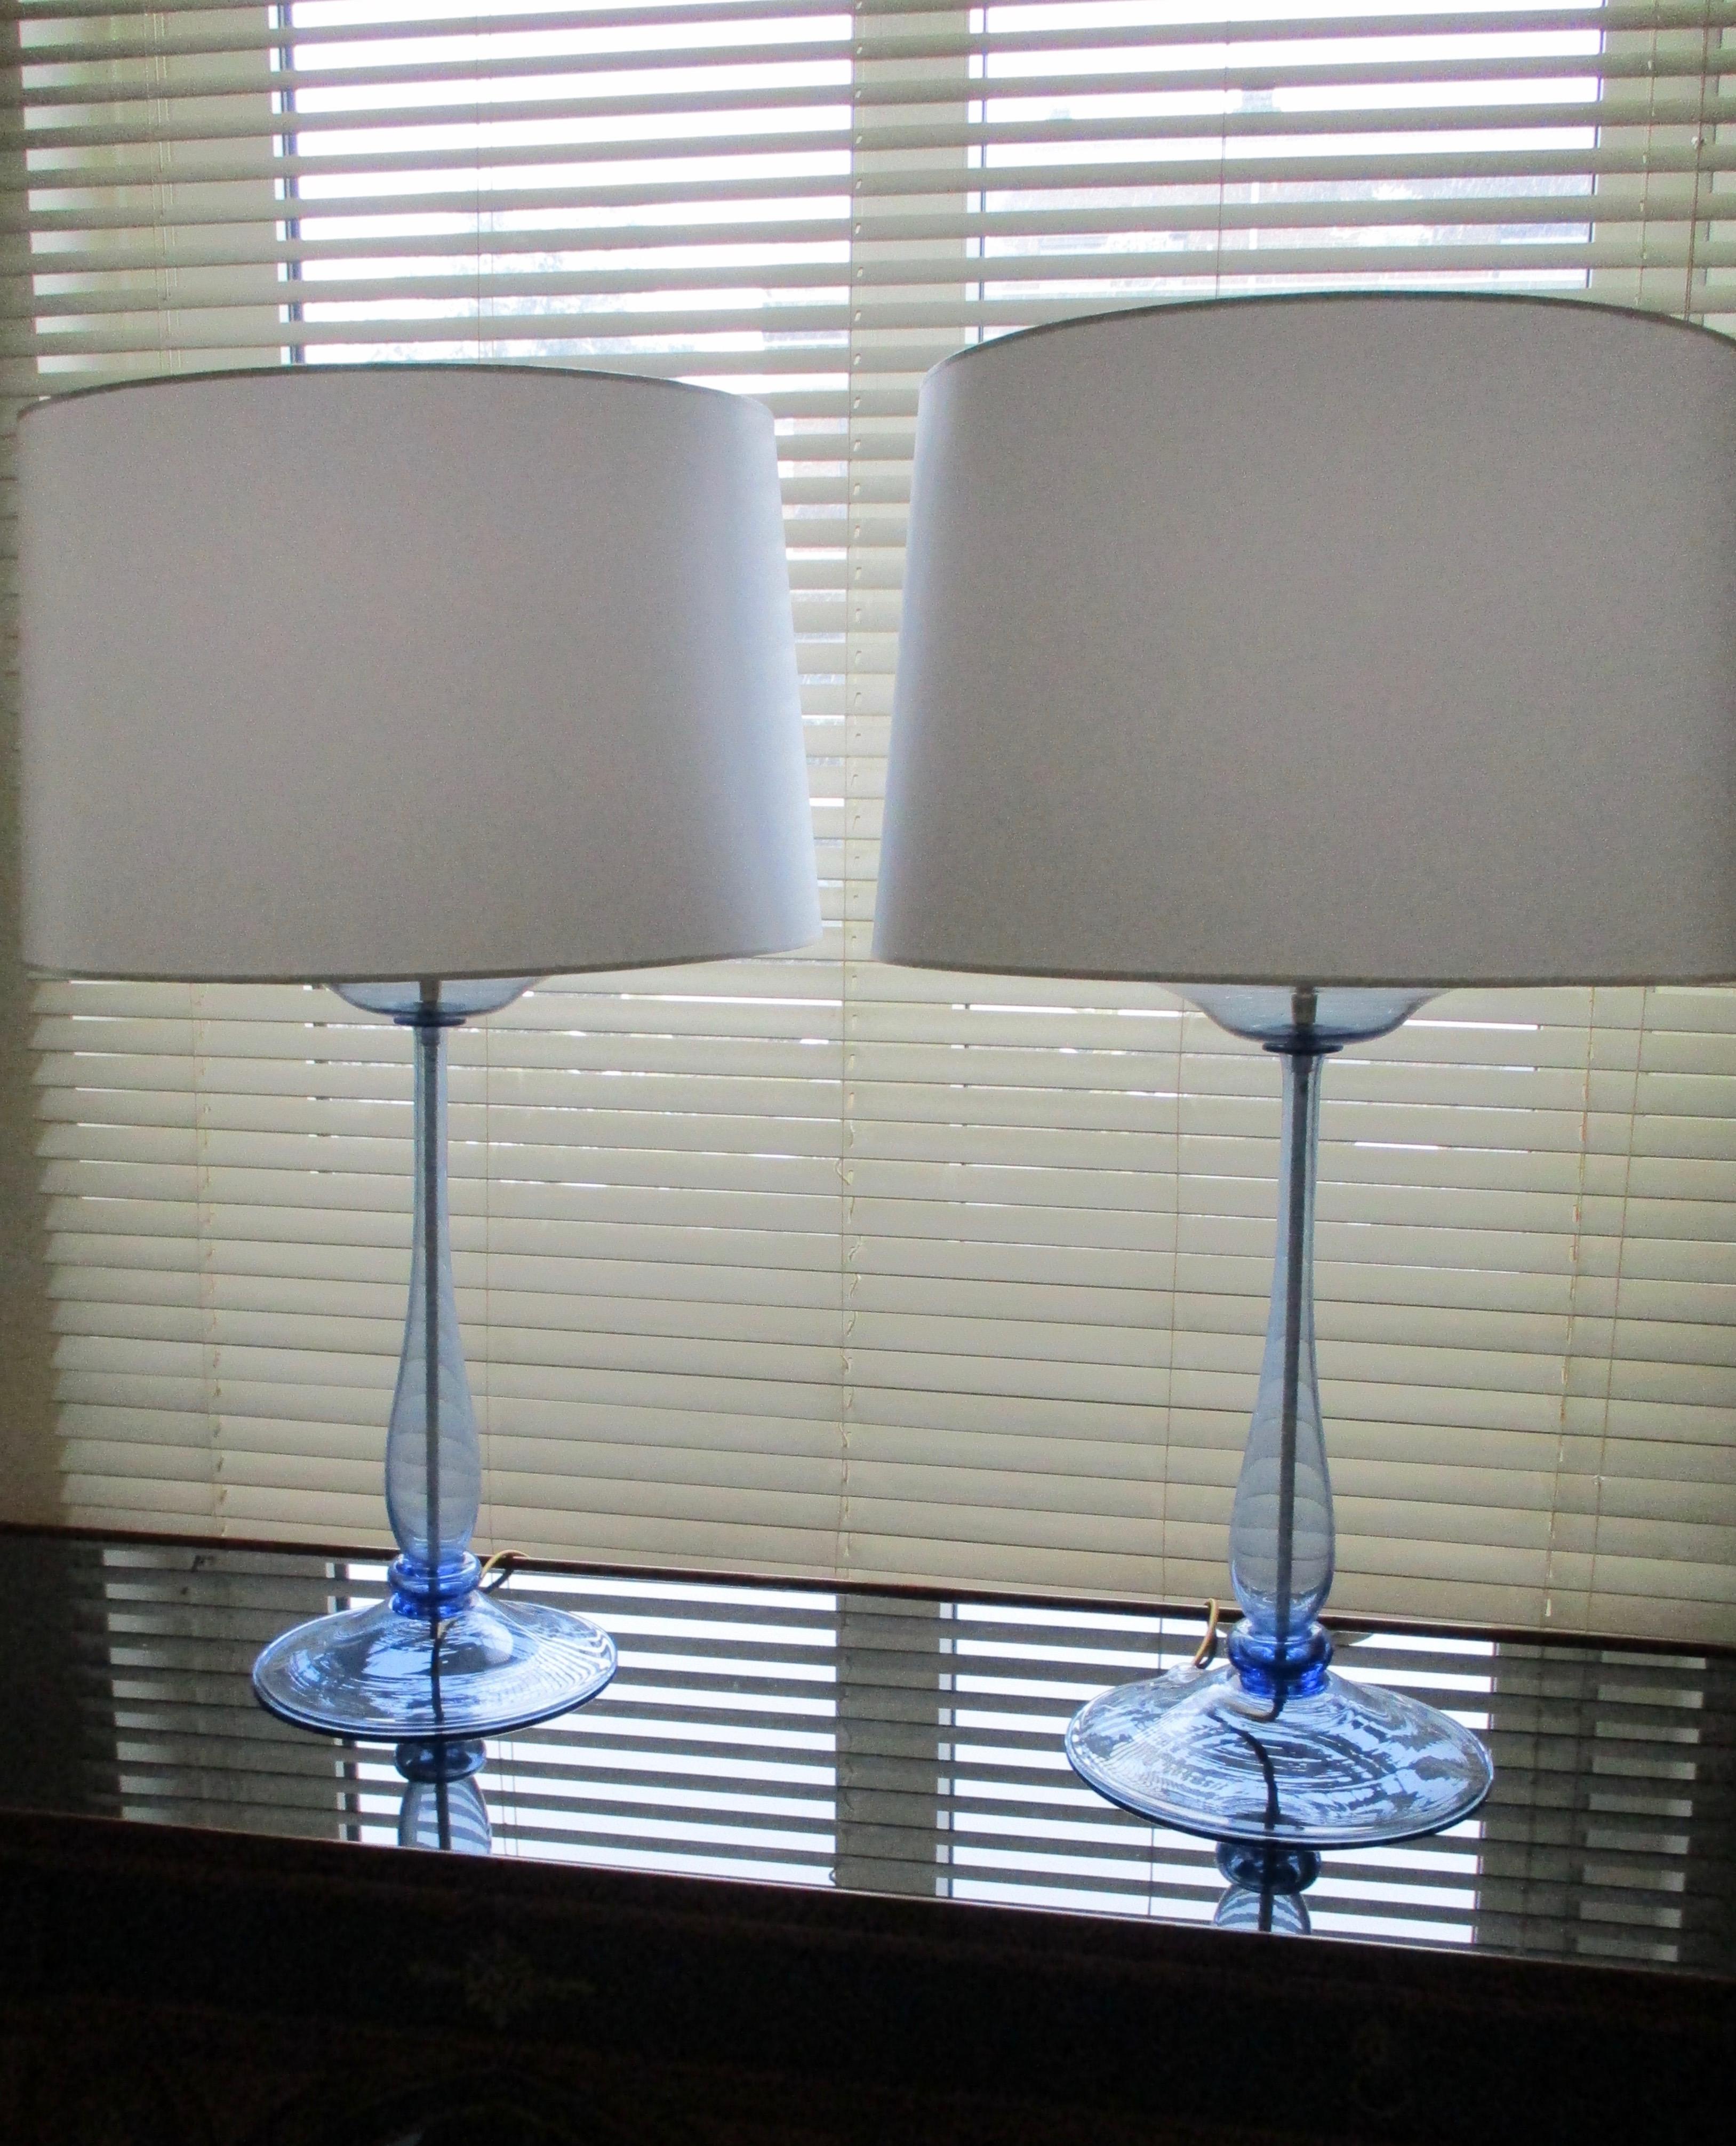 Pair of big cobalt blue Murano lamps attributed to Venini, Cappellin.
New lampshades, new wiring, one light,
Circa 1930.